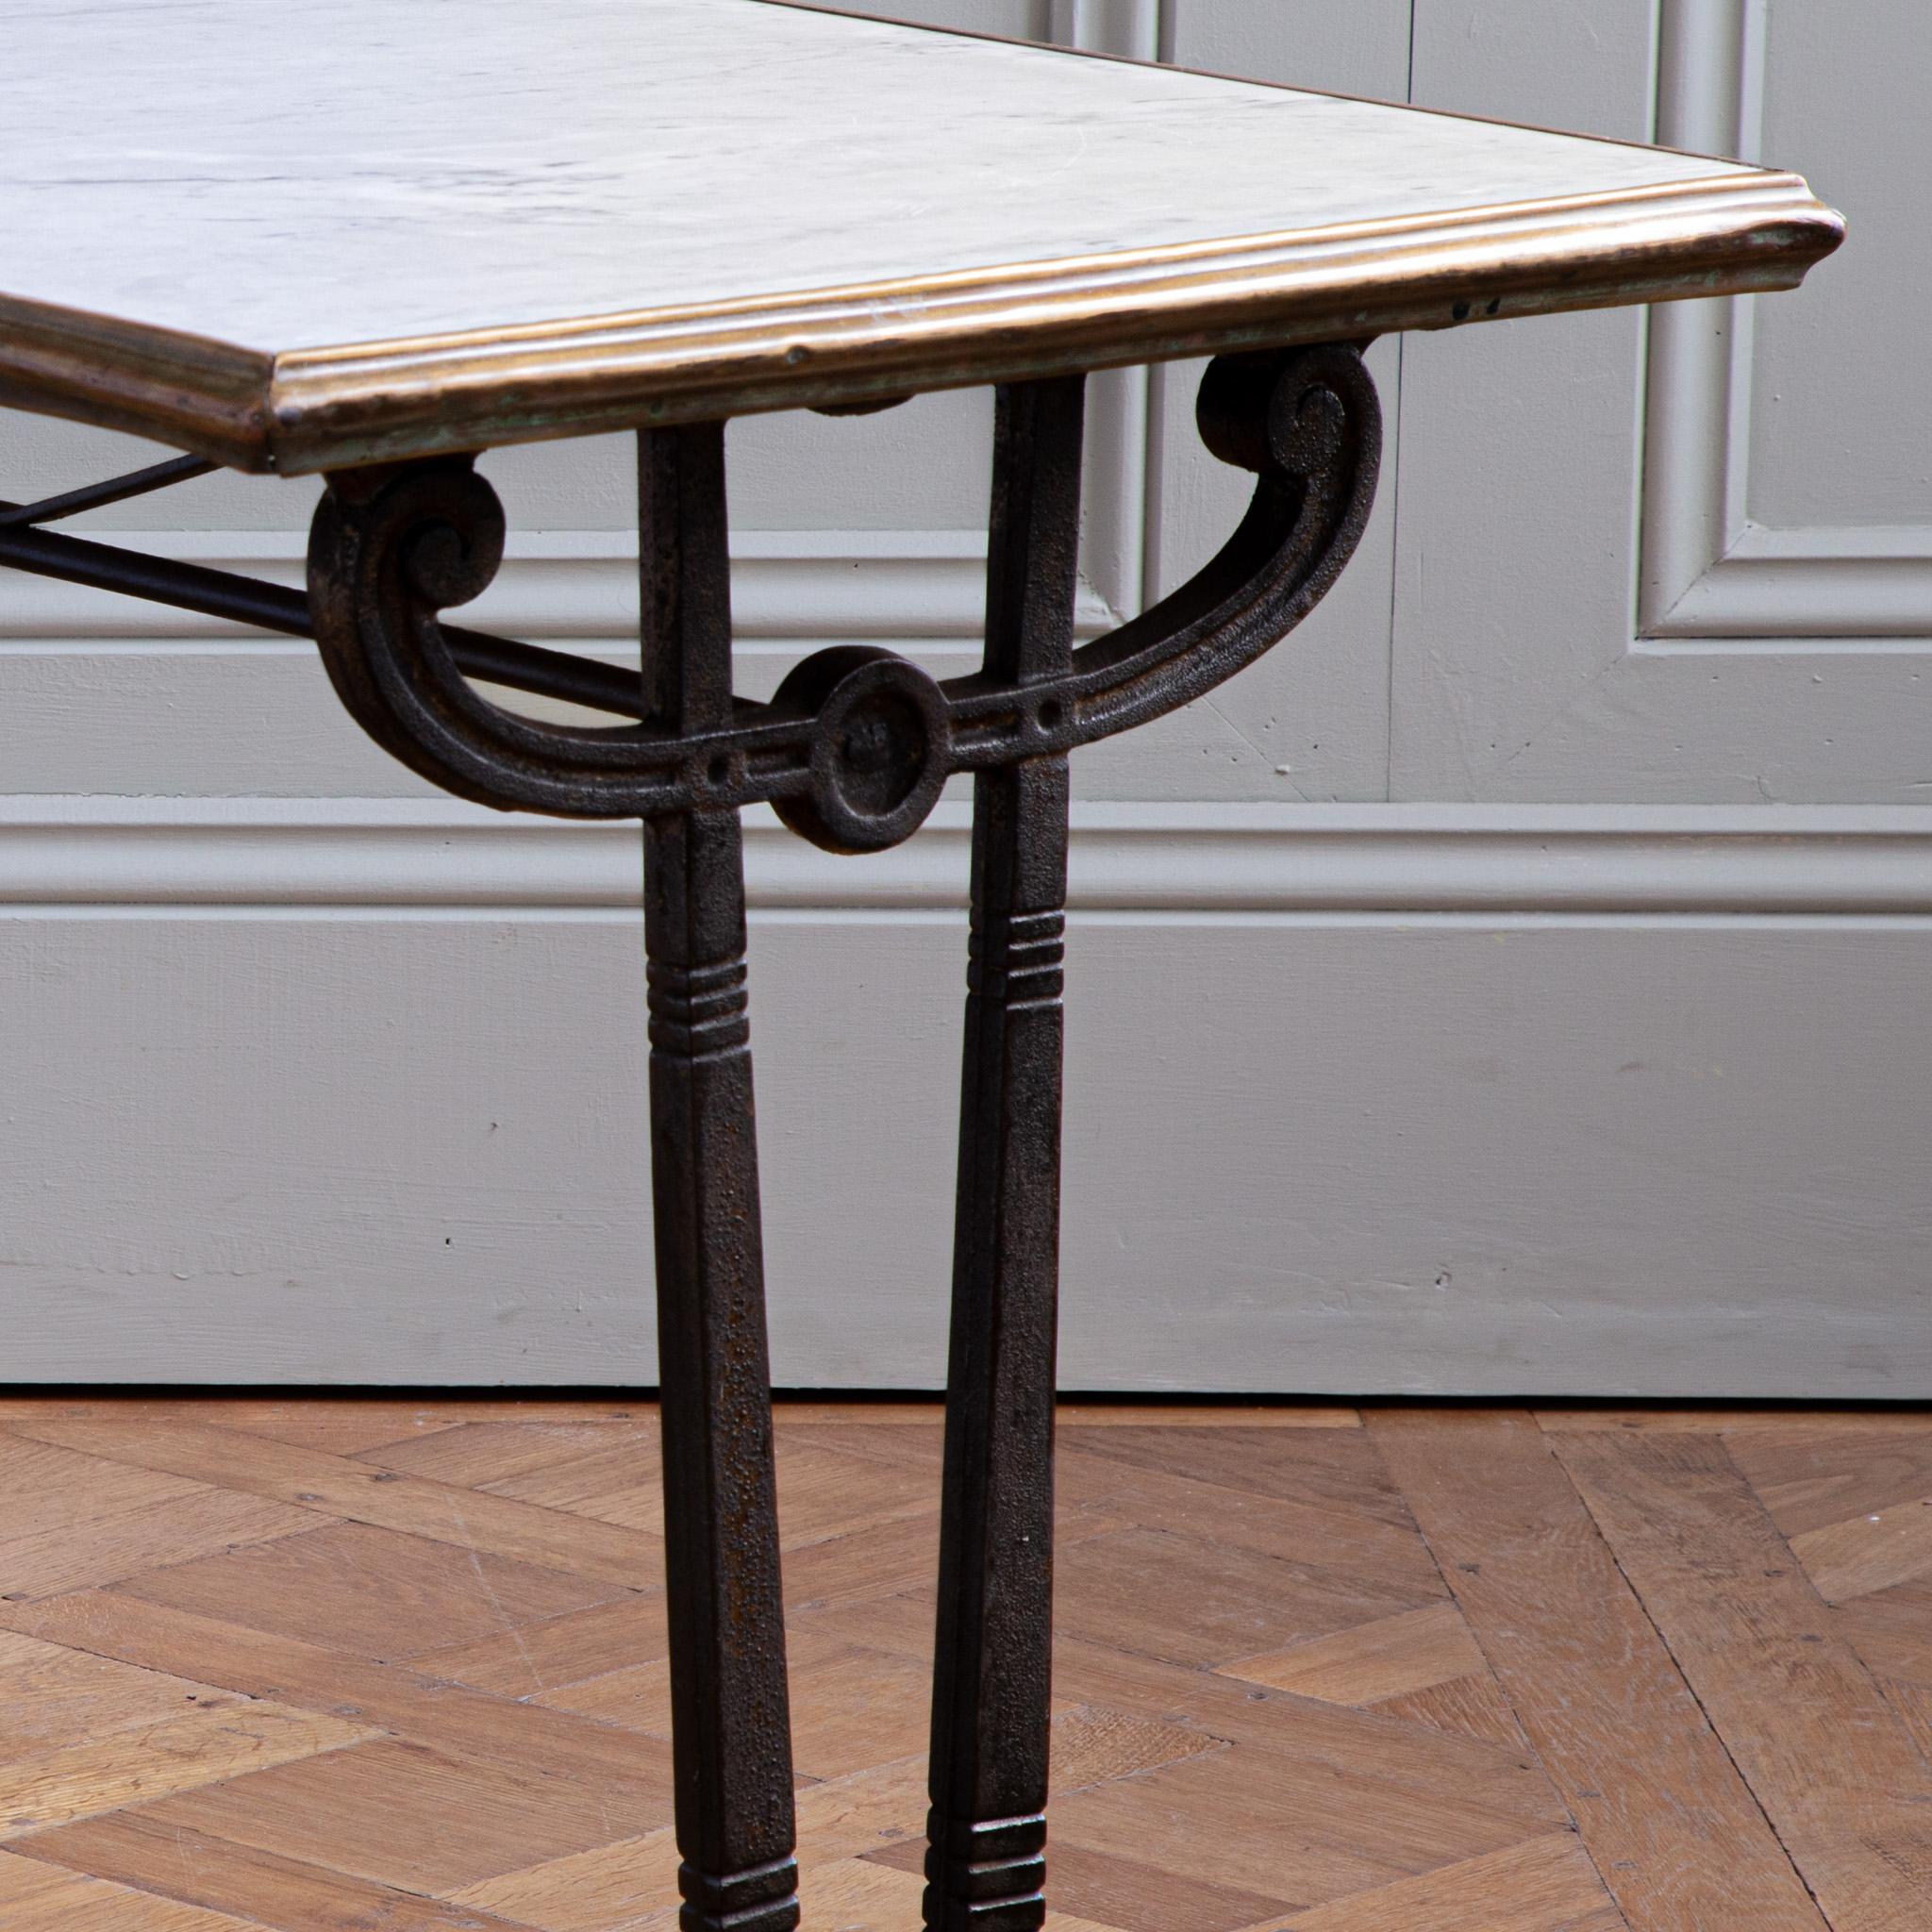 Art nouveau French Bistro Table Circa 1900 by Charlionais & Panassier In Good Condition For Sale In London, Park Royal